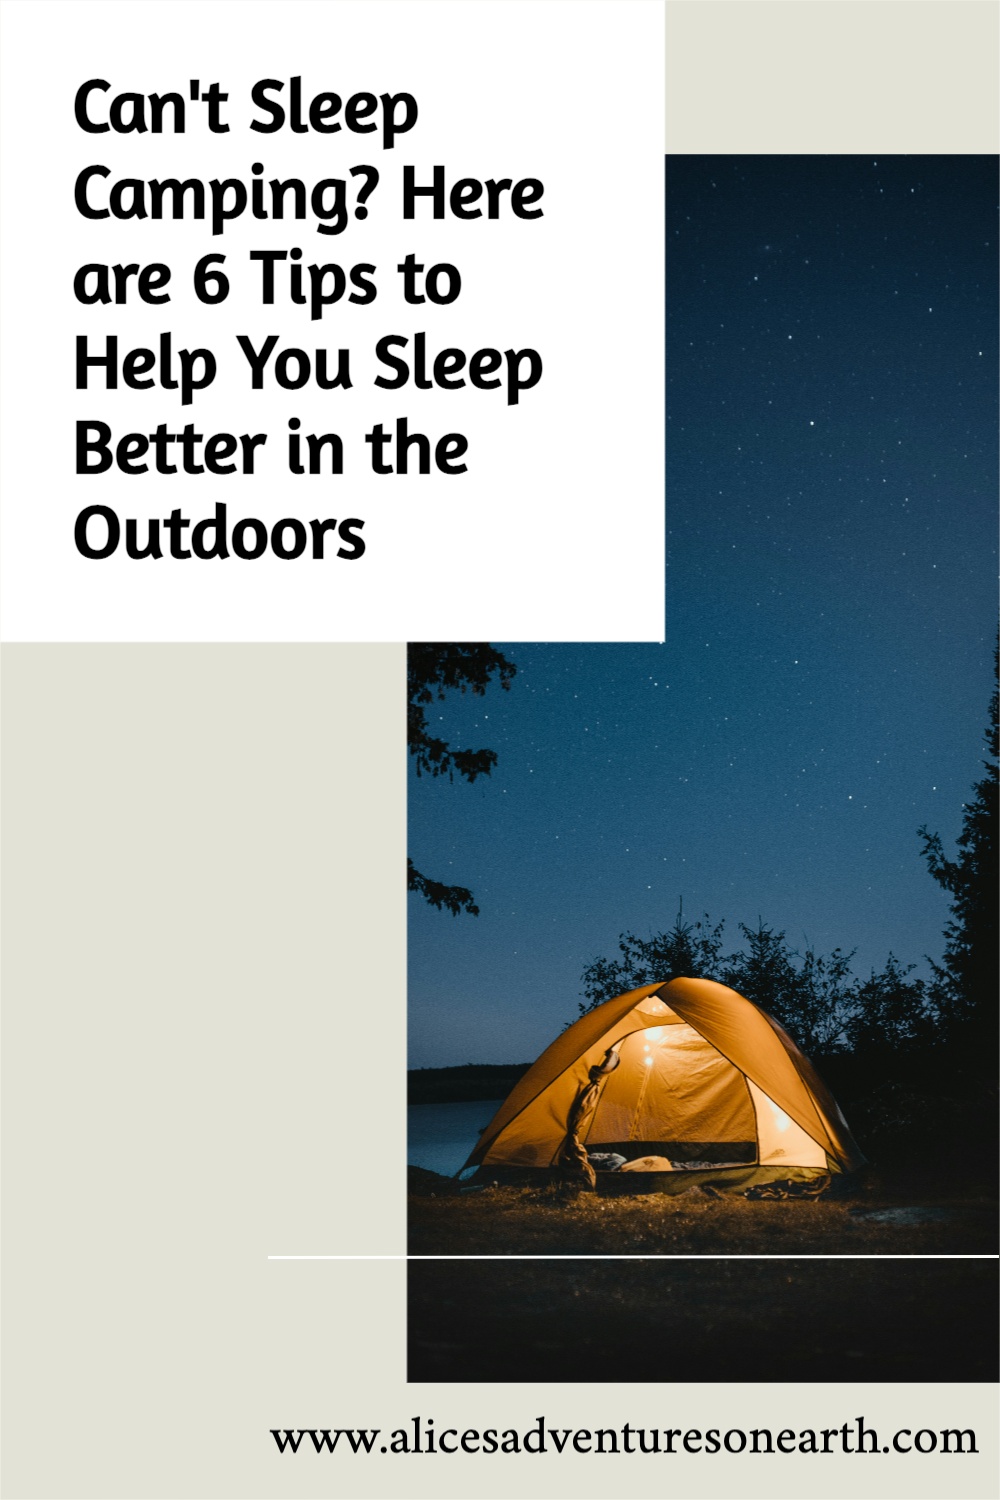 Ready to upgrade your outdoor sleep game? 😴 Check out these 6 amazing tips from ALICE'S ADVENTURES ON EARTH, and you'll be snoozing like a pro under the stars in no time! 🌠  